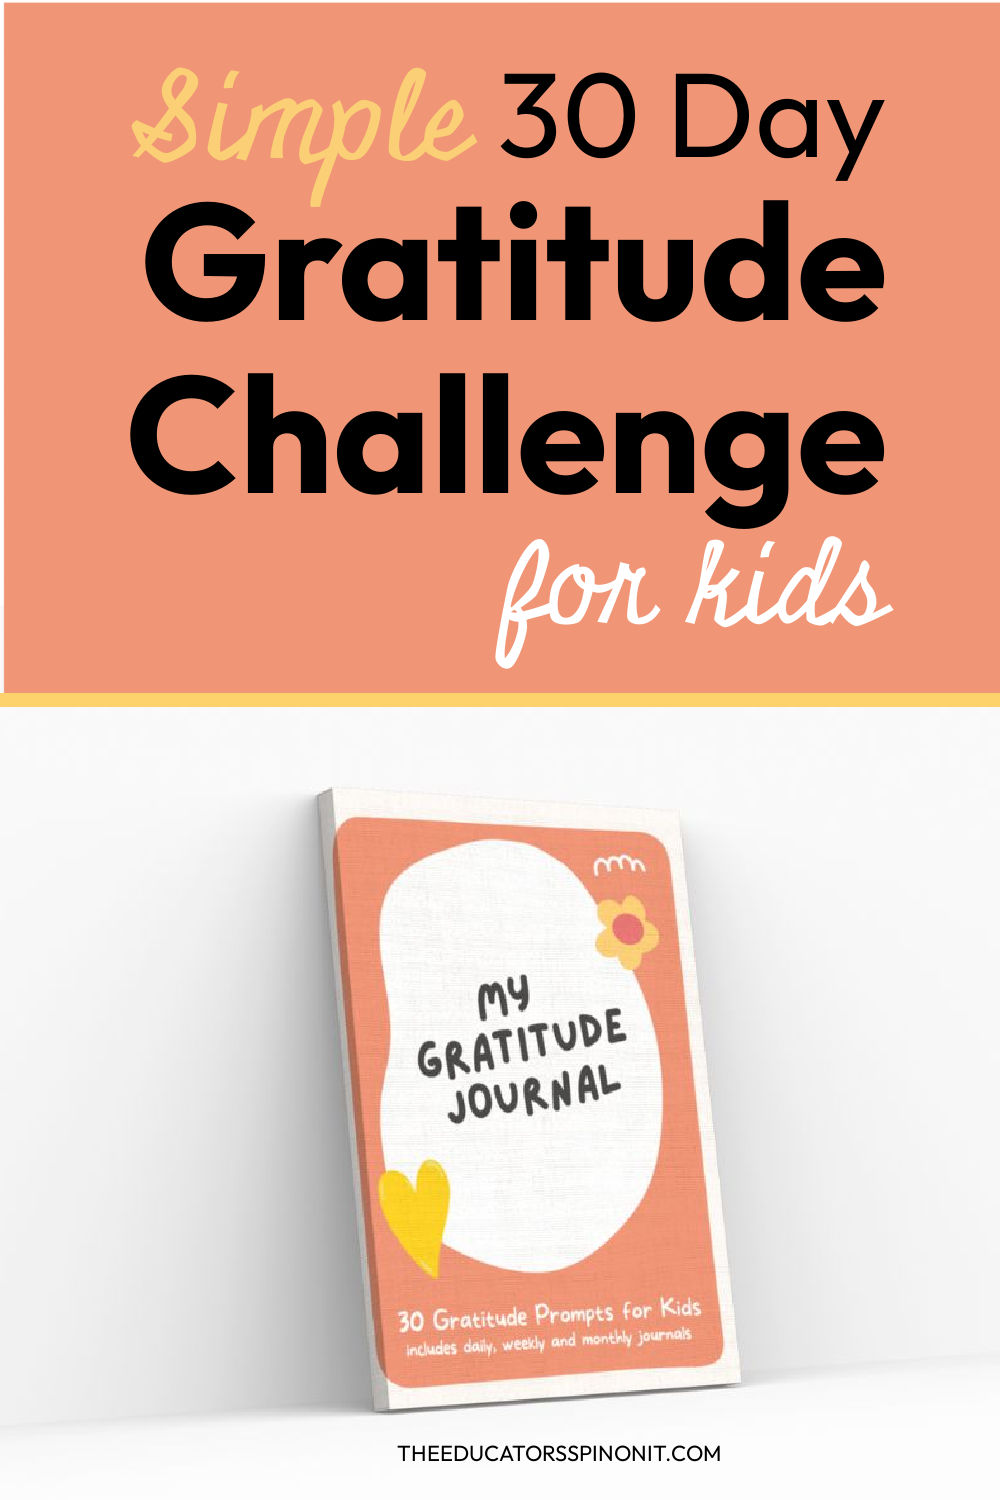 30 Journal Prompts for Kids to Aid Self-Discovery